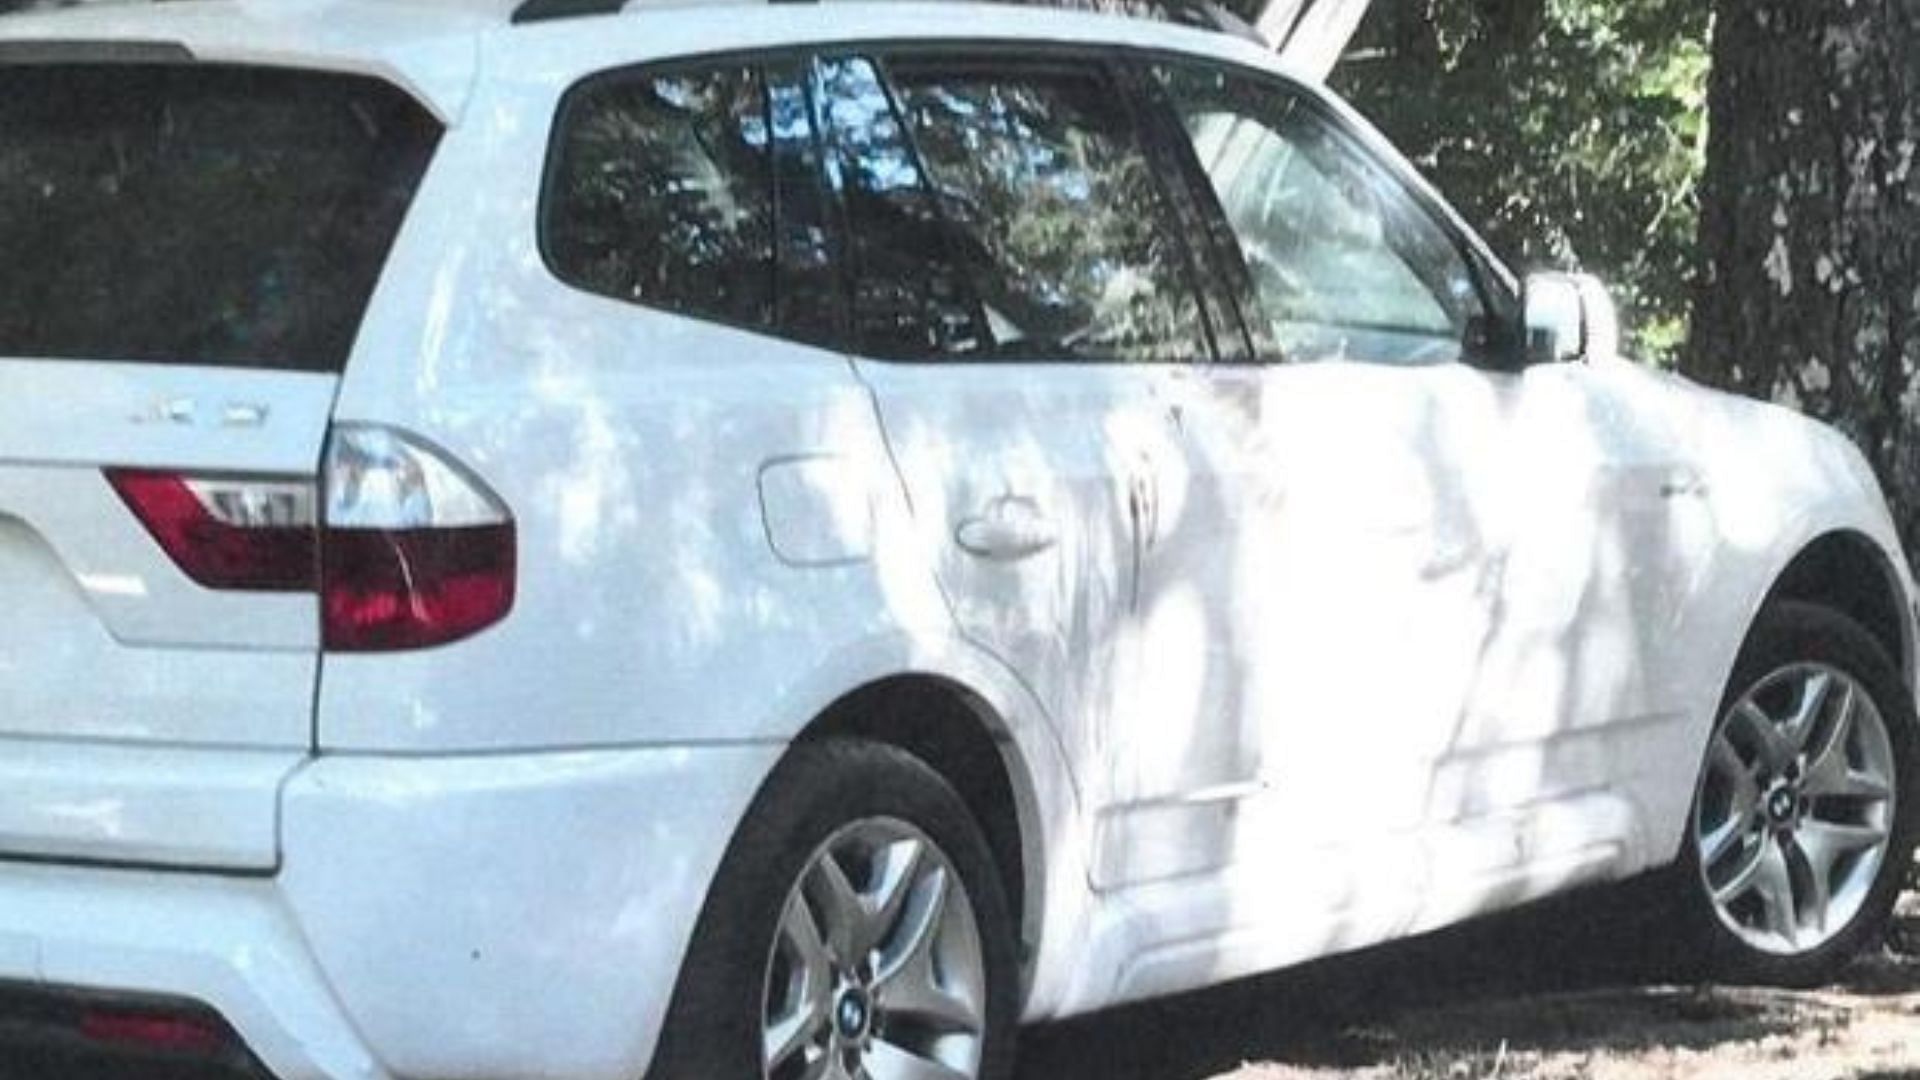 A still of the white BMW SUV that was used in the kidnapping of Atre (Image Via CBS)